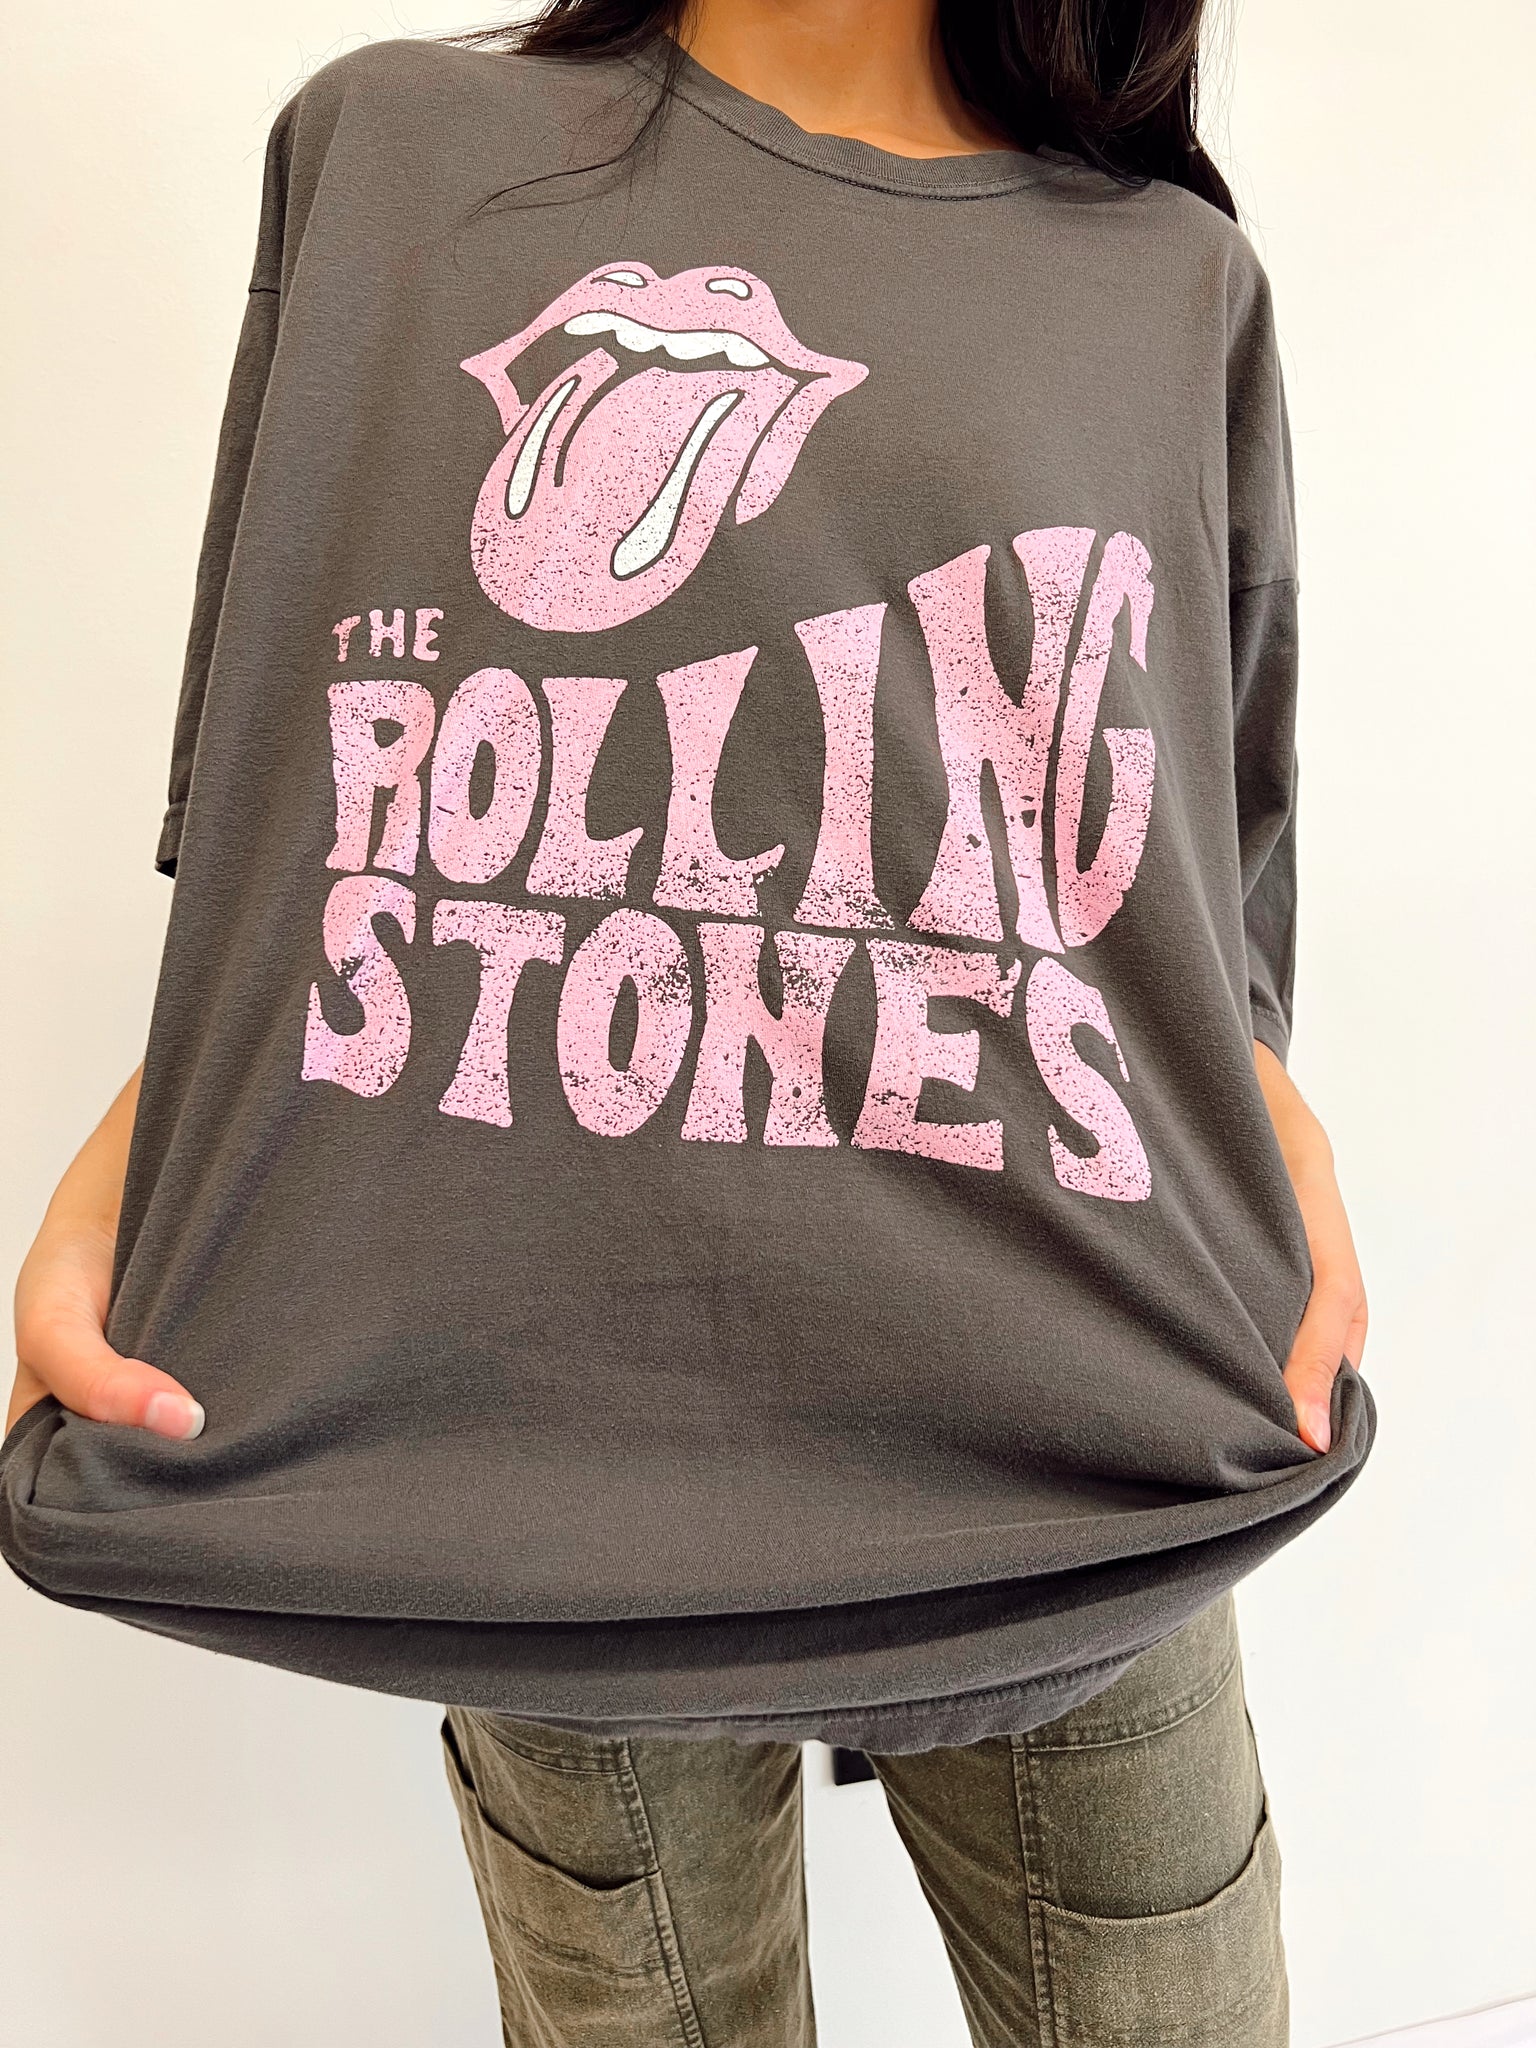 The Rolling Stones Charcoal Tee